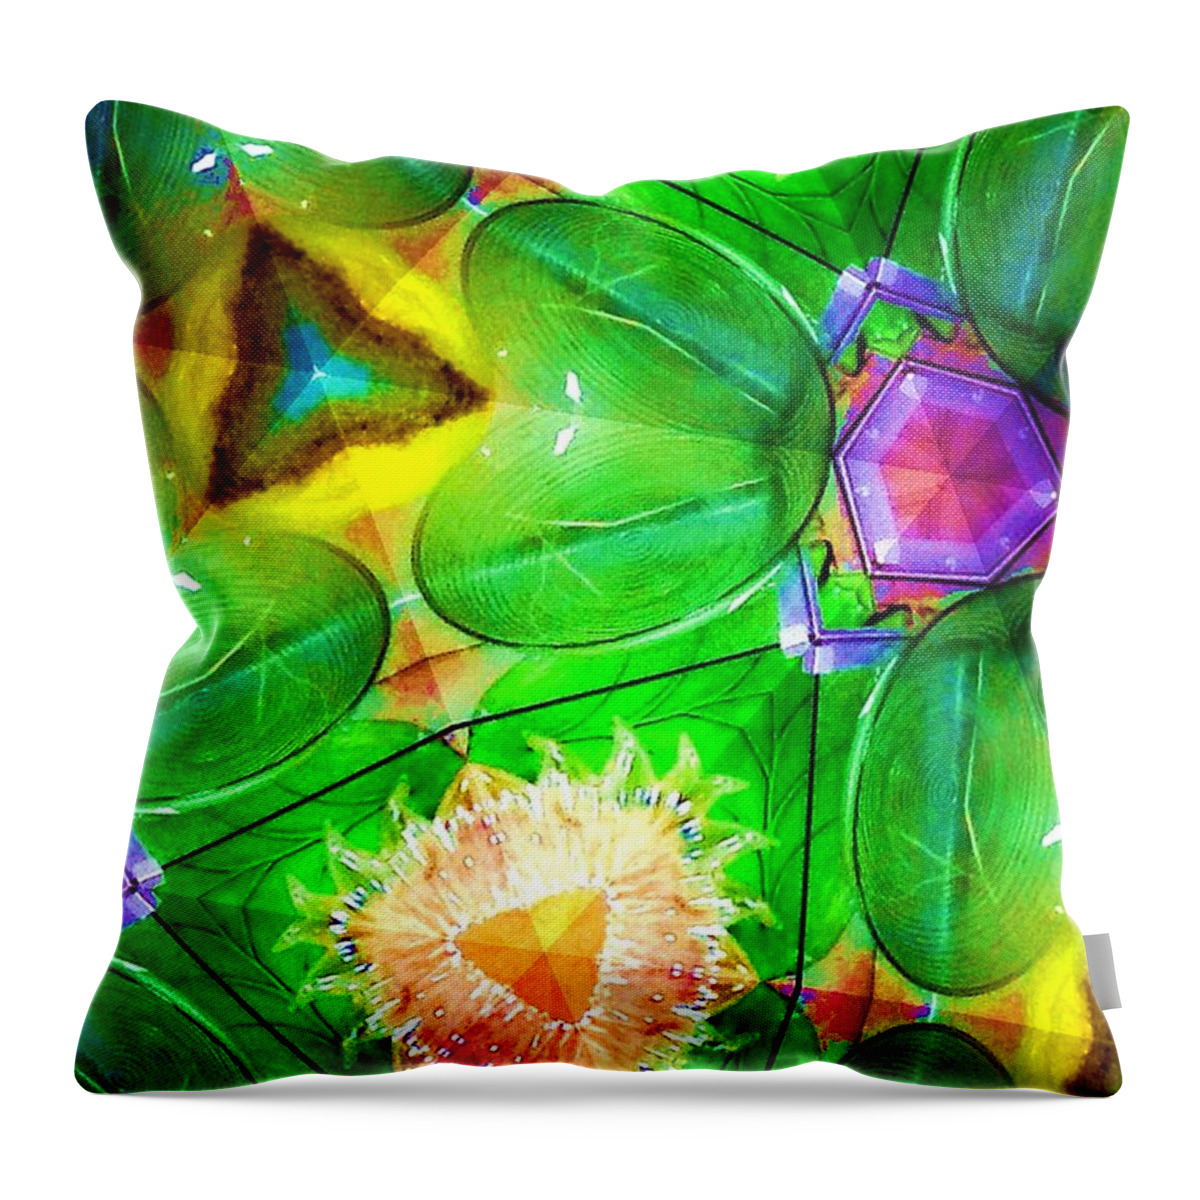 Green Throw Pillow featuring the digital art Green Thing 2 Abstract by Saundra Myles